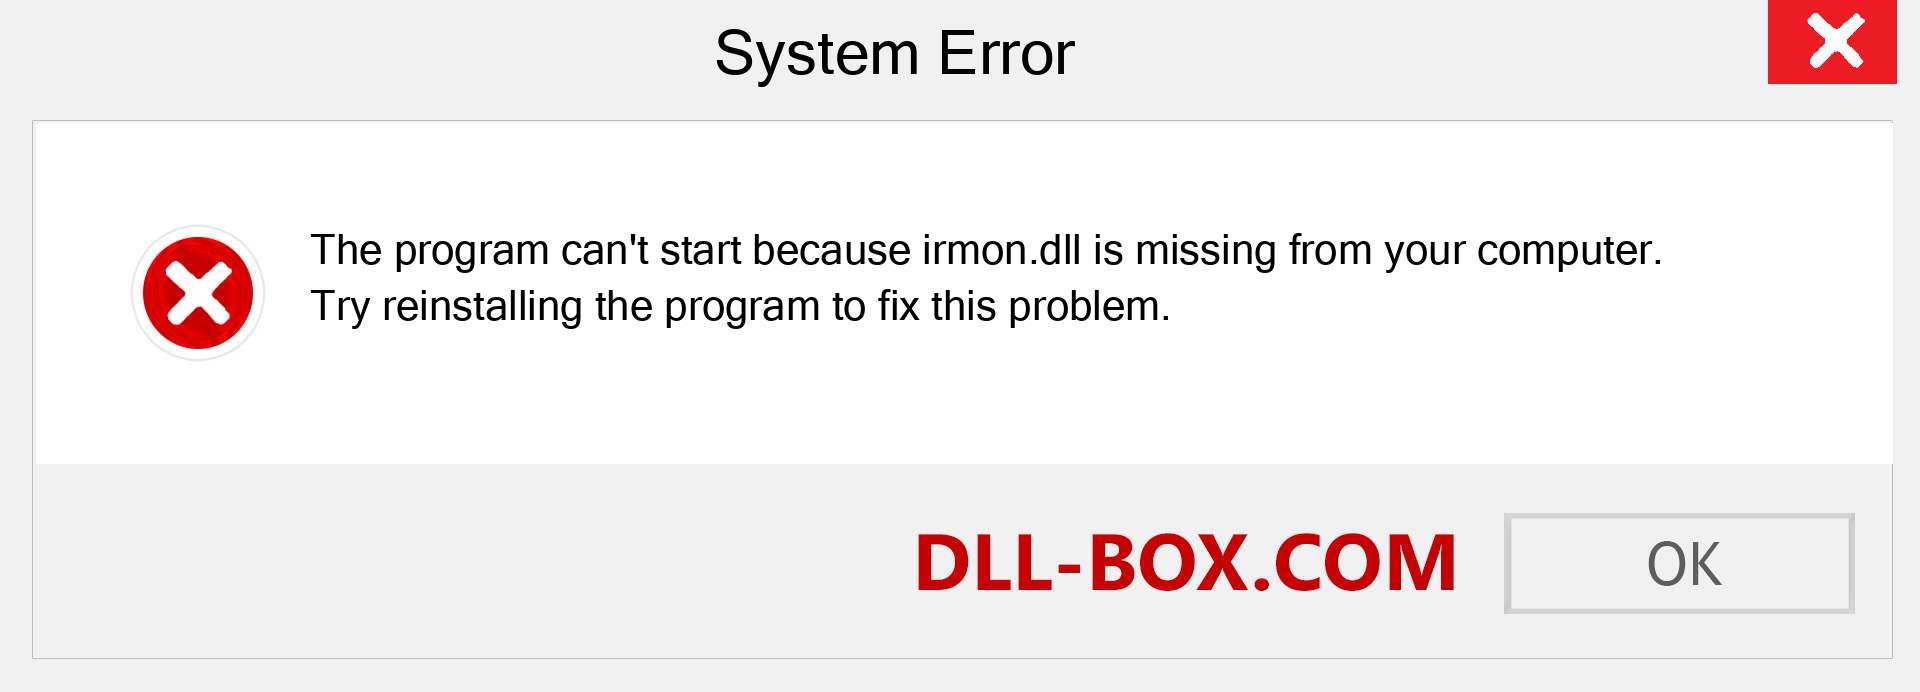  irmon.dll file is missing?. Download for Windows 7, 8, 10 - Fix  irmon dll Missing Error on Windows, photos, images